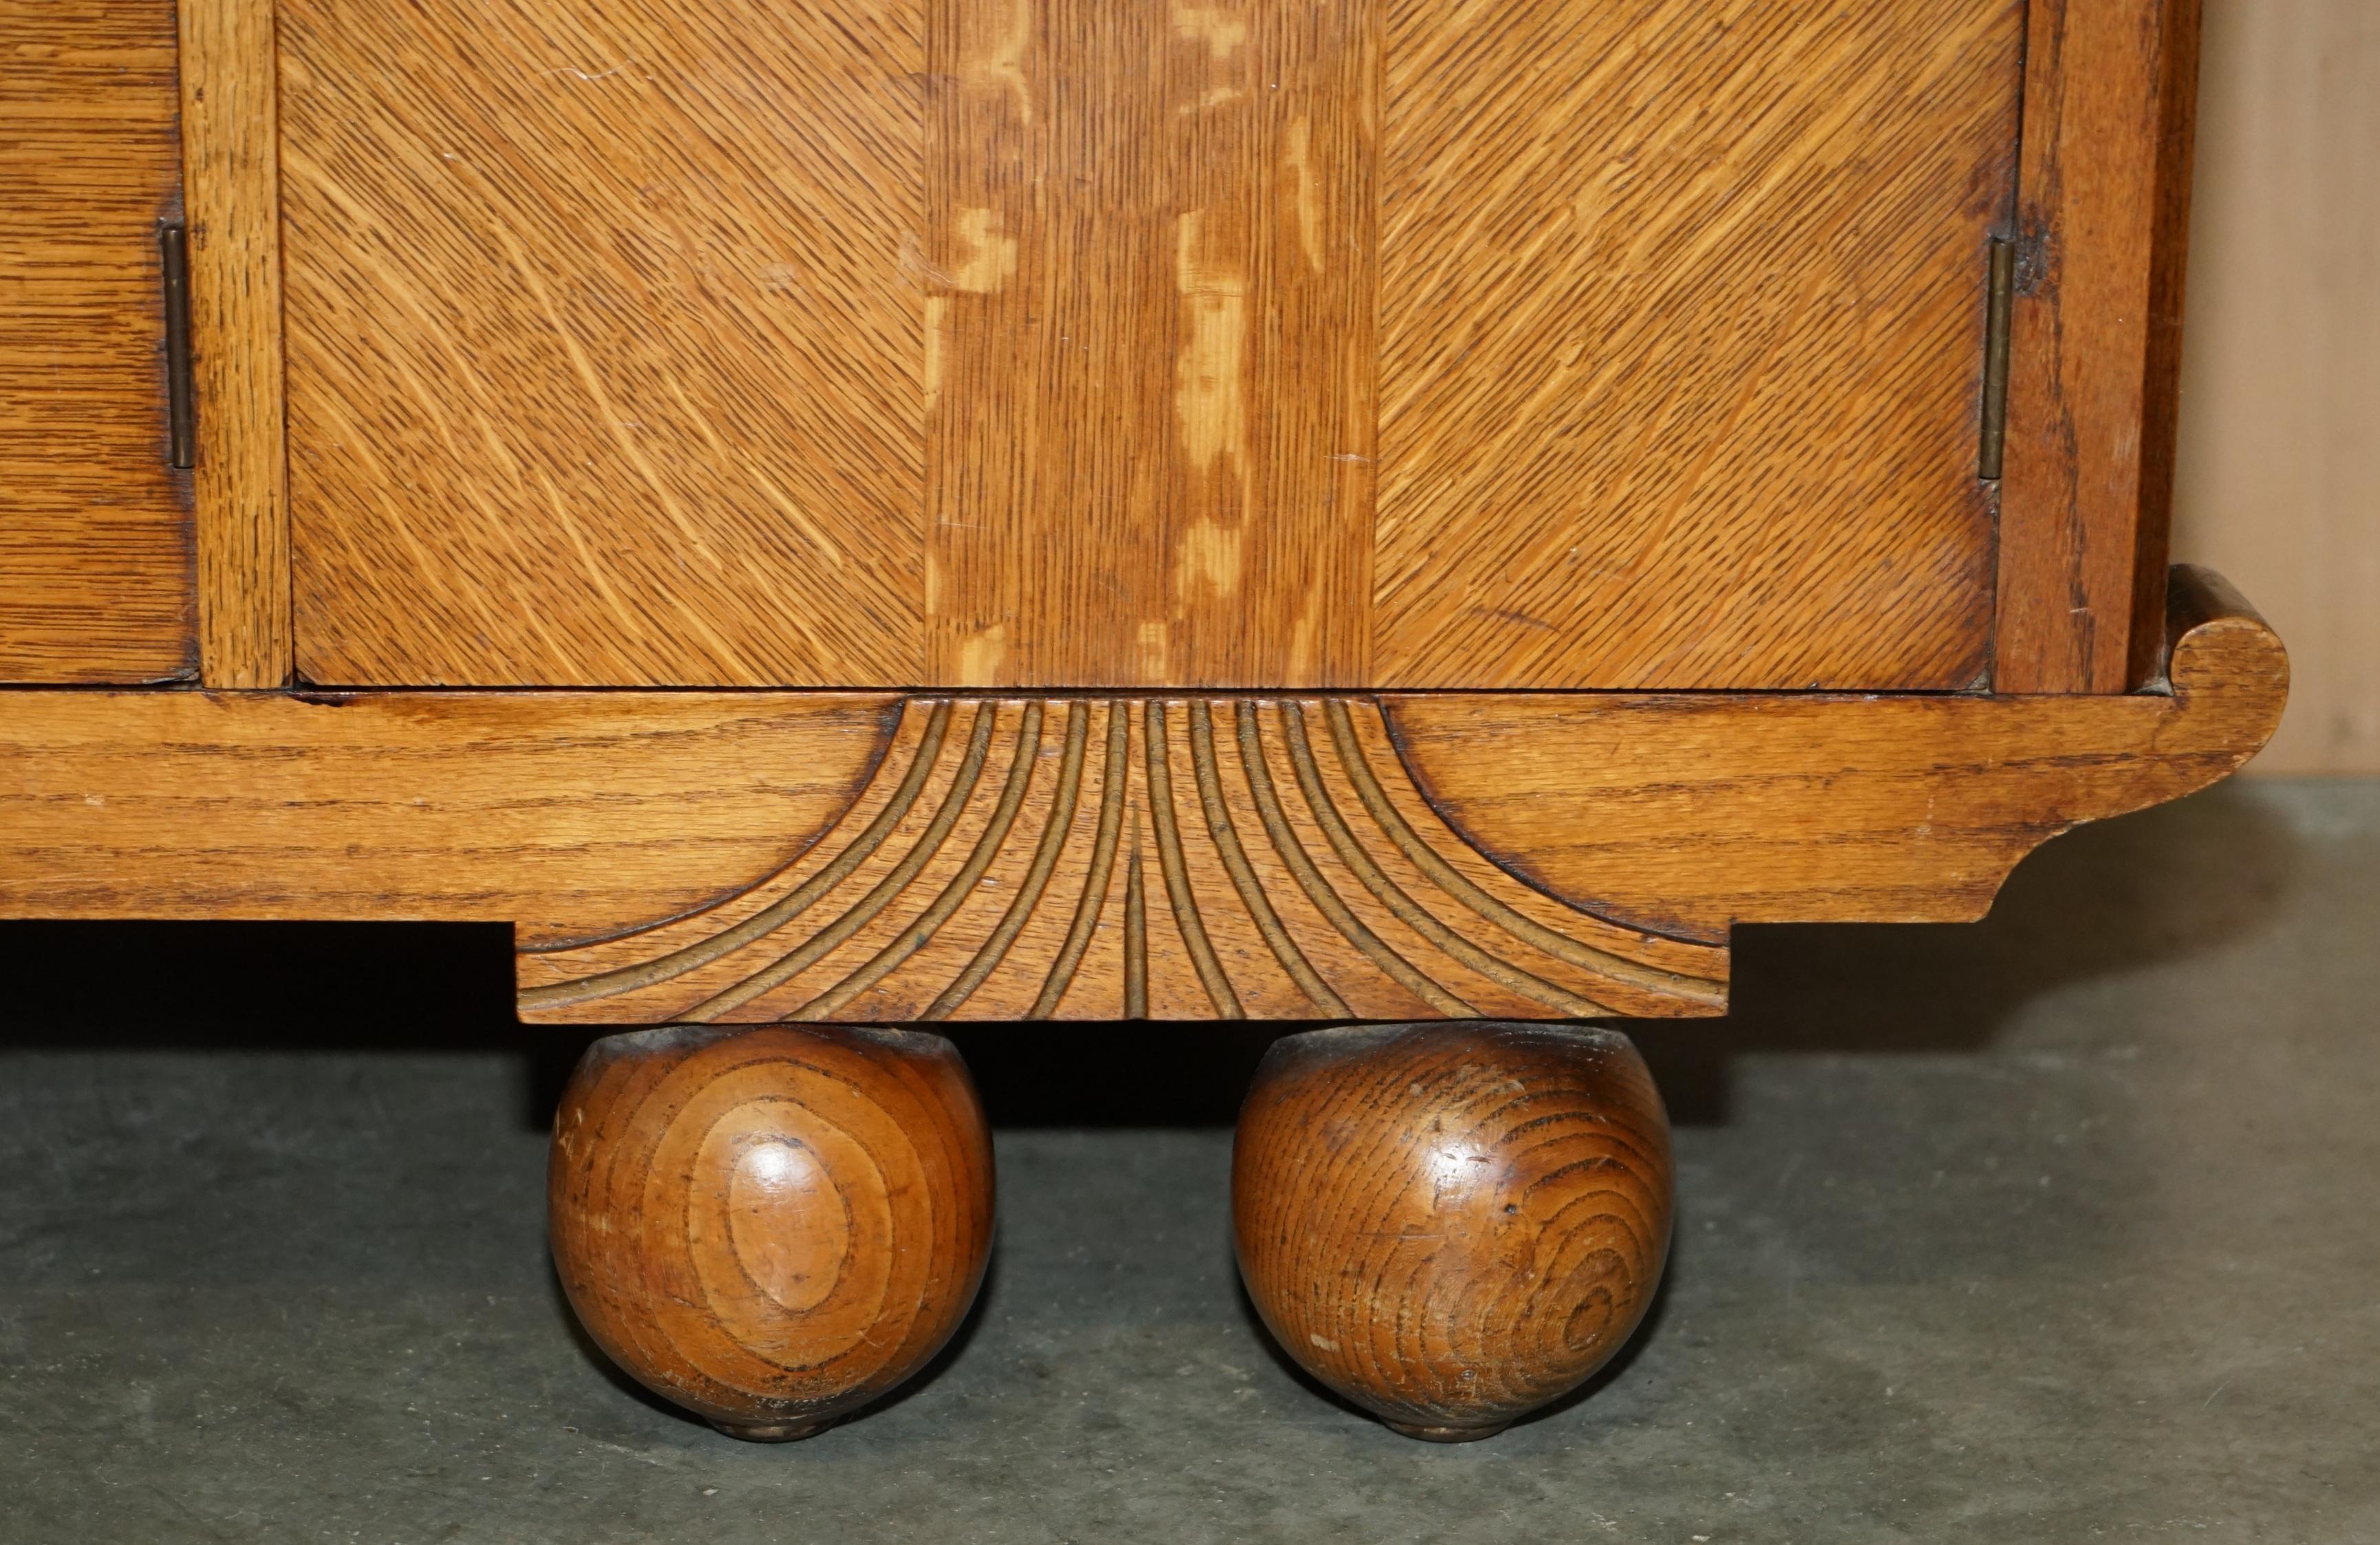 FINE LIBERTY'S COTSWOLD ART DECO OAK CARVED SiDEBOARD CIRCA 1920 PART OF A SUITE im Angebot 4